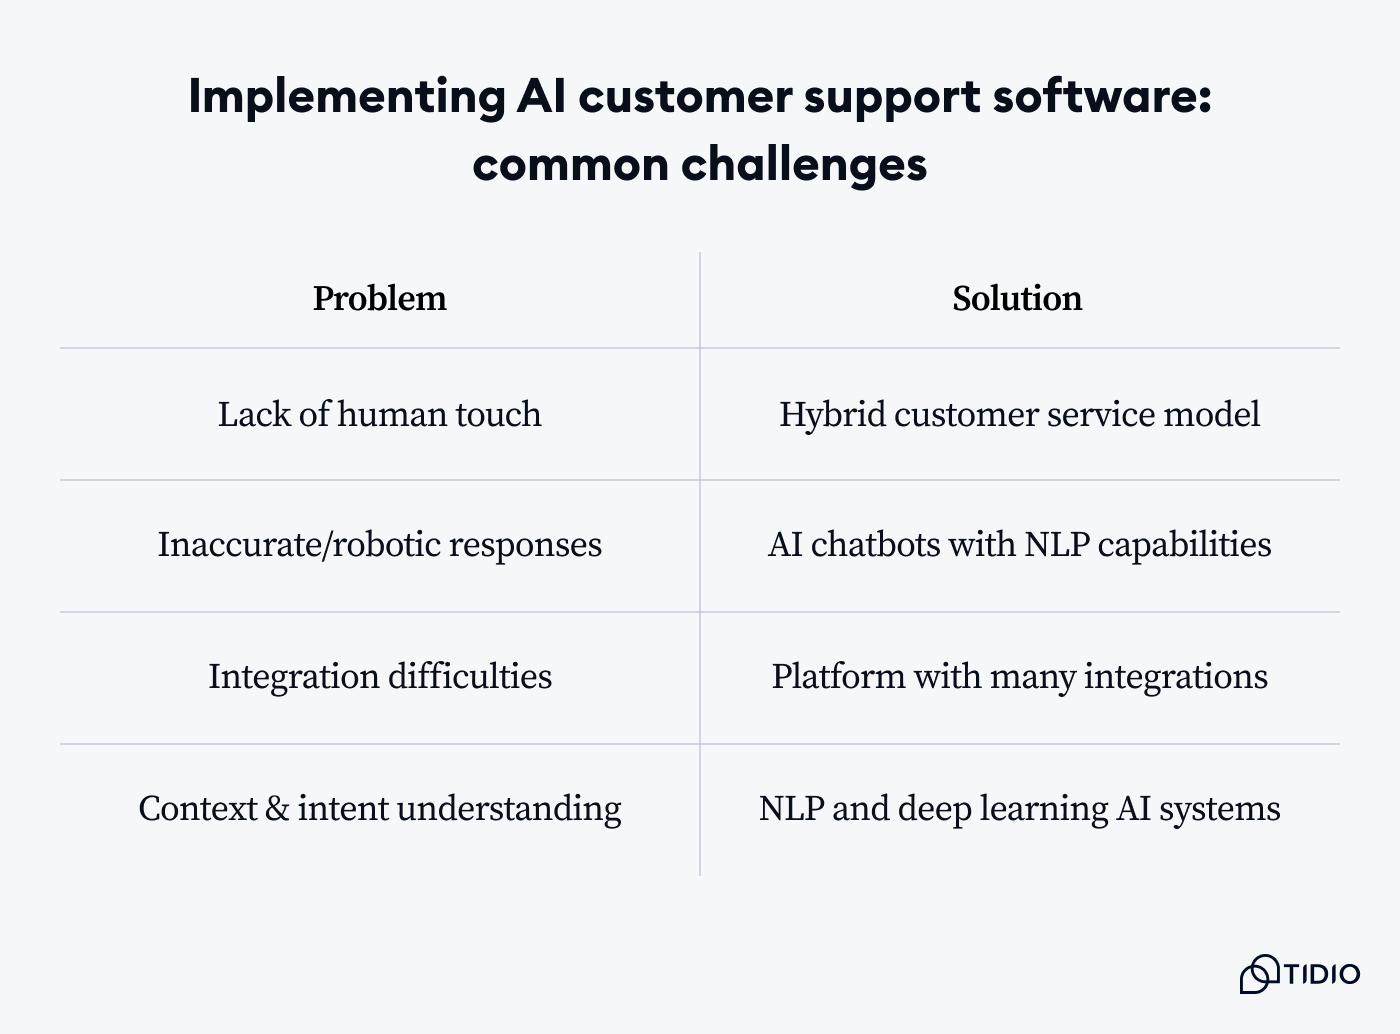 common challanges of implementing AI customer suppoert software on image